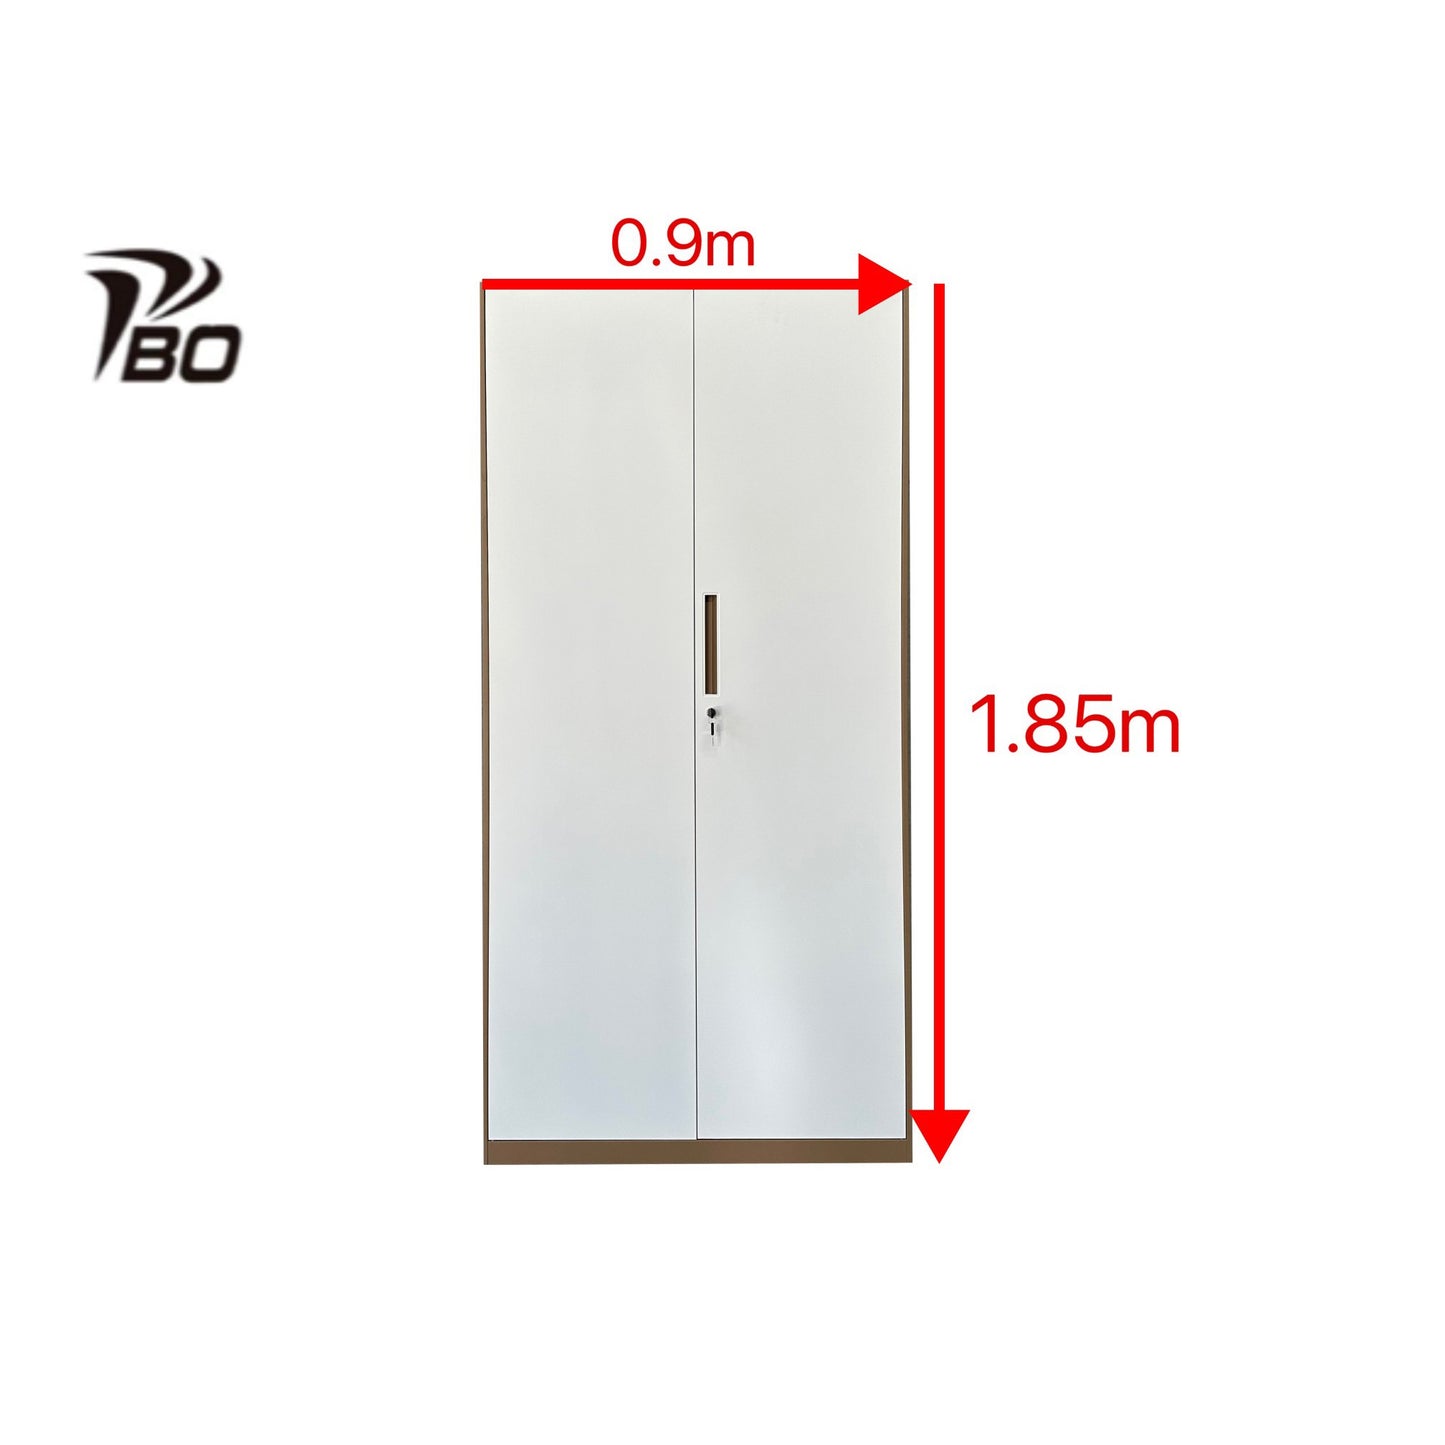 File Cabinet with Doors Coffee & White 1.85m(H)*0.9m(L)*0.4m(D)